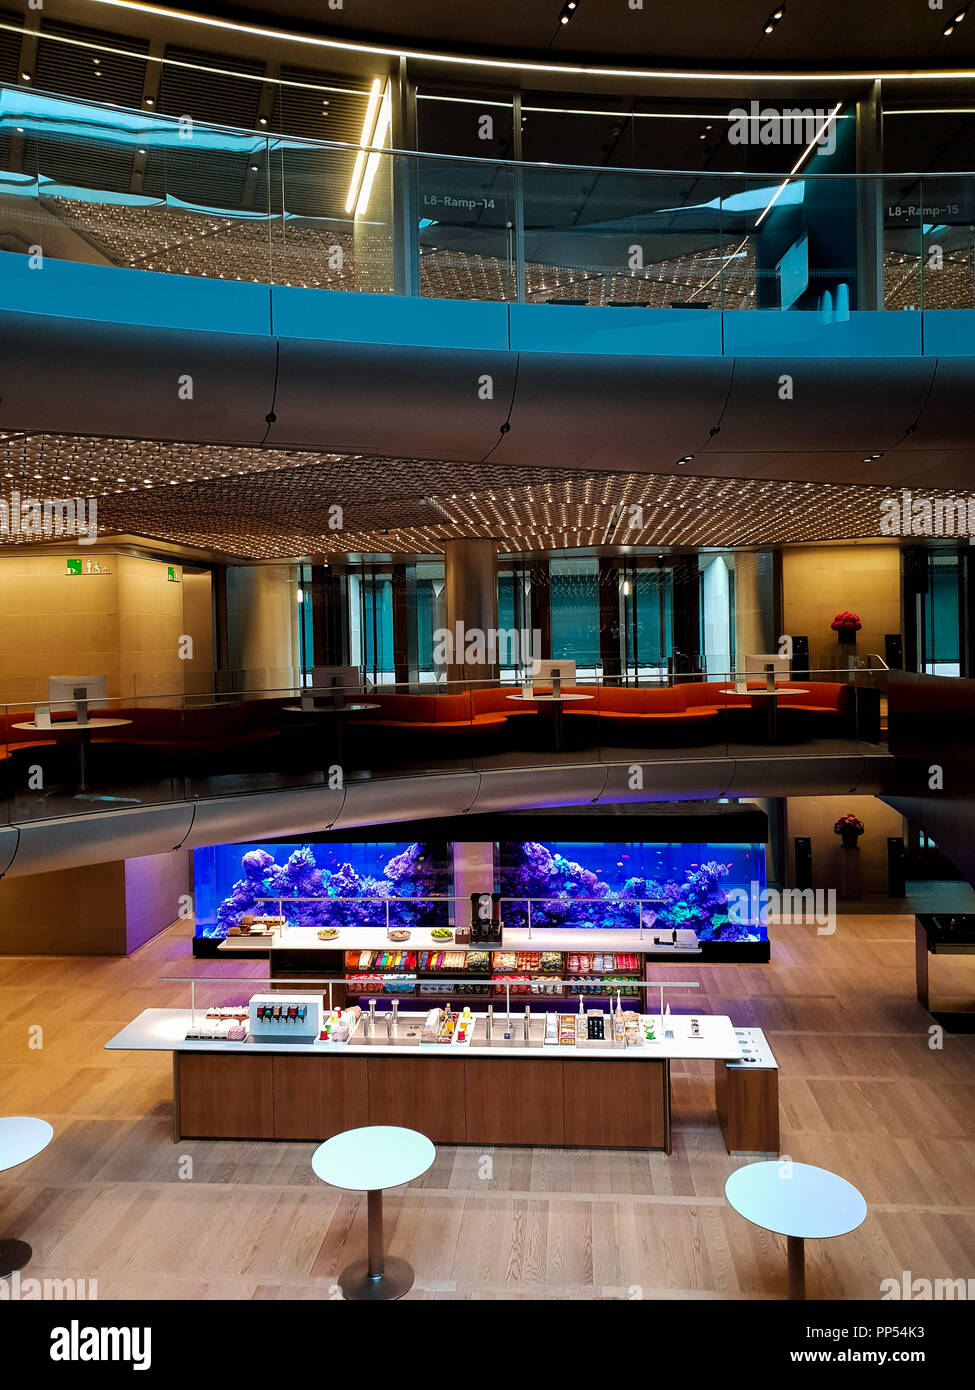 London, UK. 23rd Sept 2018. Interior view of Bloomberg European Headquarters in London. Bloomberg takes part in the 26th London Open House Weekend.  Bloomberg's European headquarters is the world's most sustainable office building. Home to the financial technology and information company's 4,000 London-based employees, its unique design promotes collaboration and innovation.  Credit: Dinendra Haria/Alamy Live News Stock Photo